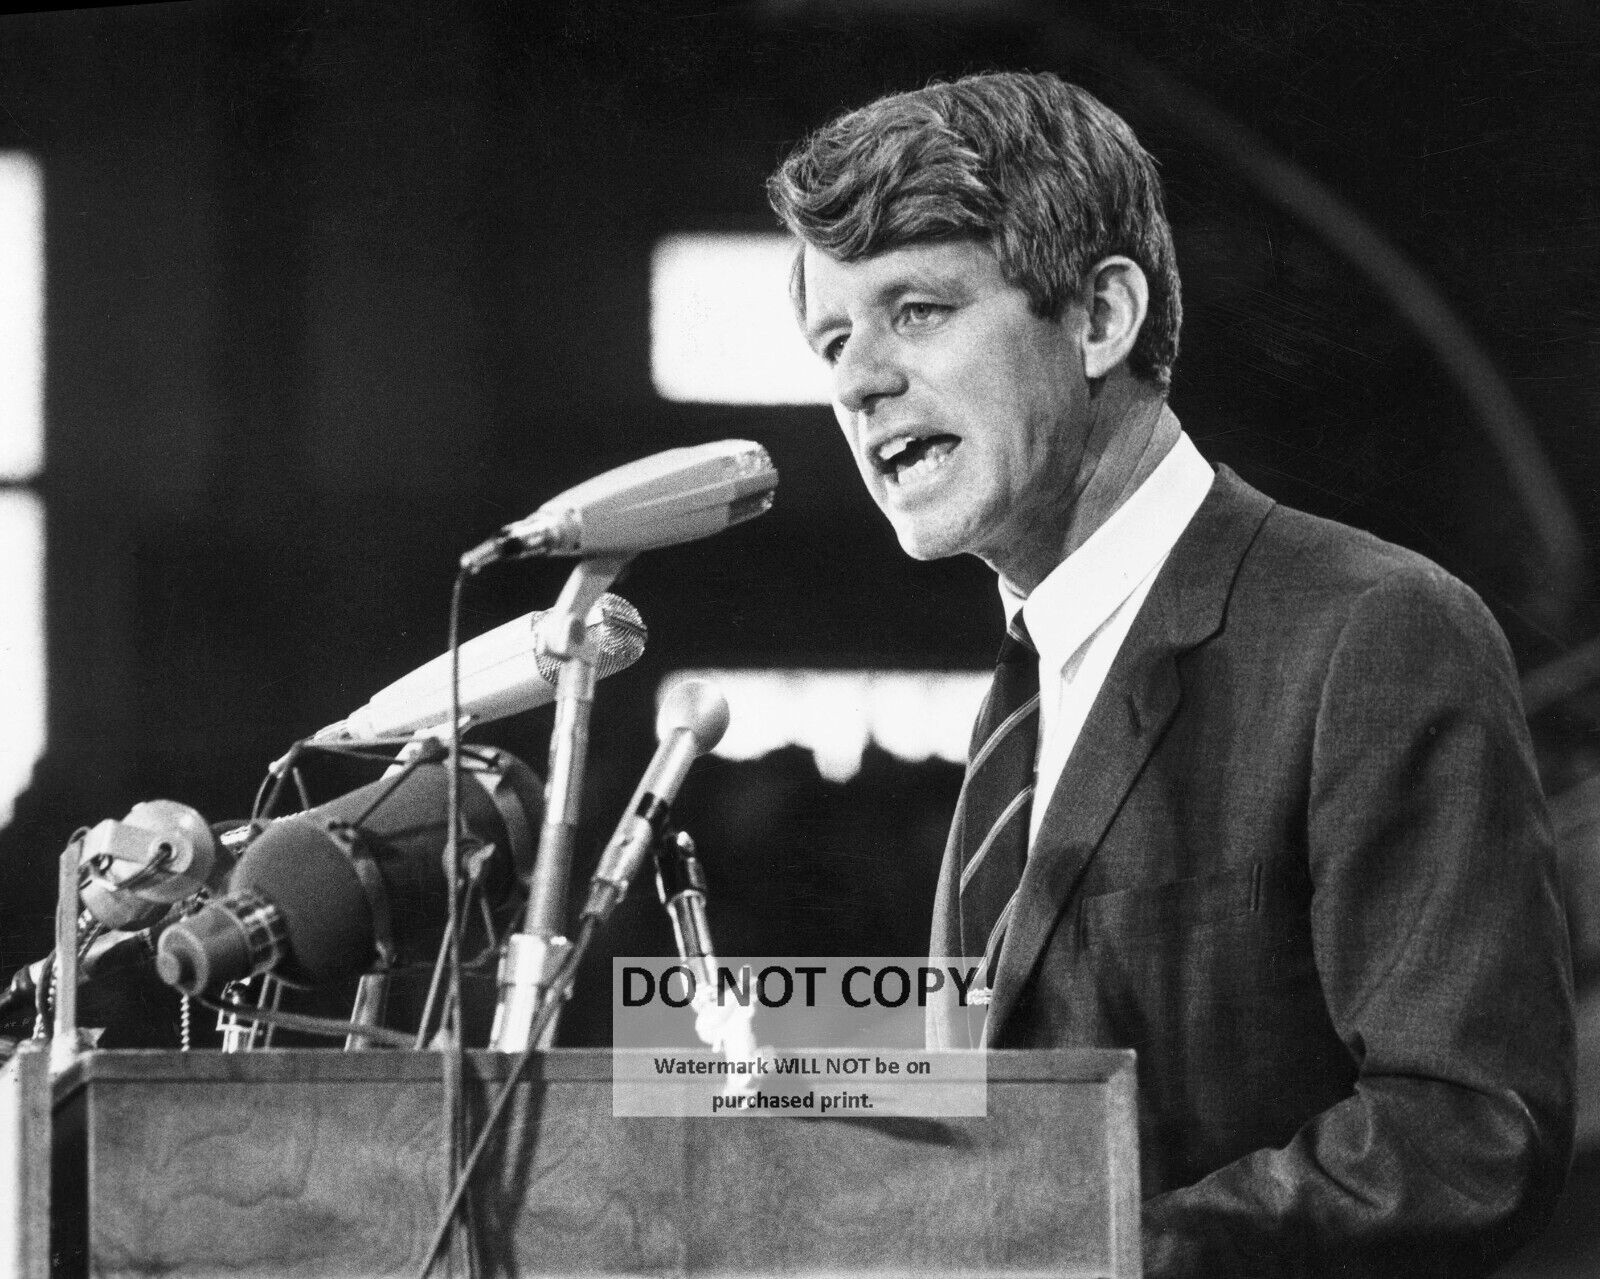 SENATOR ROBERT F. KENNEDY AT AN ELECTION RALLY IN 1968 - 8X10 PHOTO (SP504)